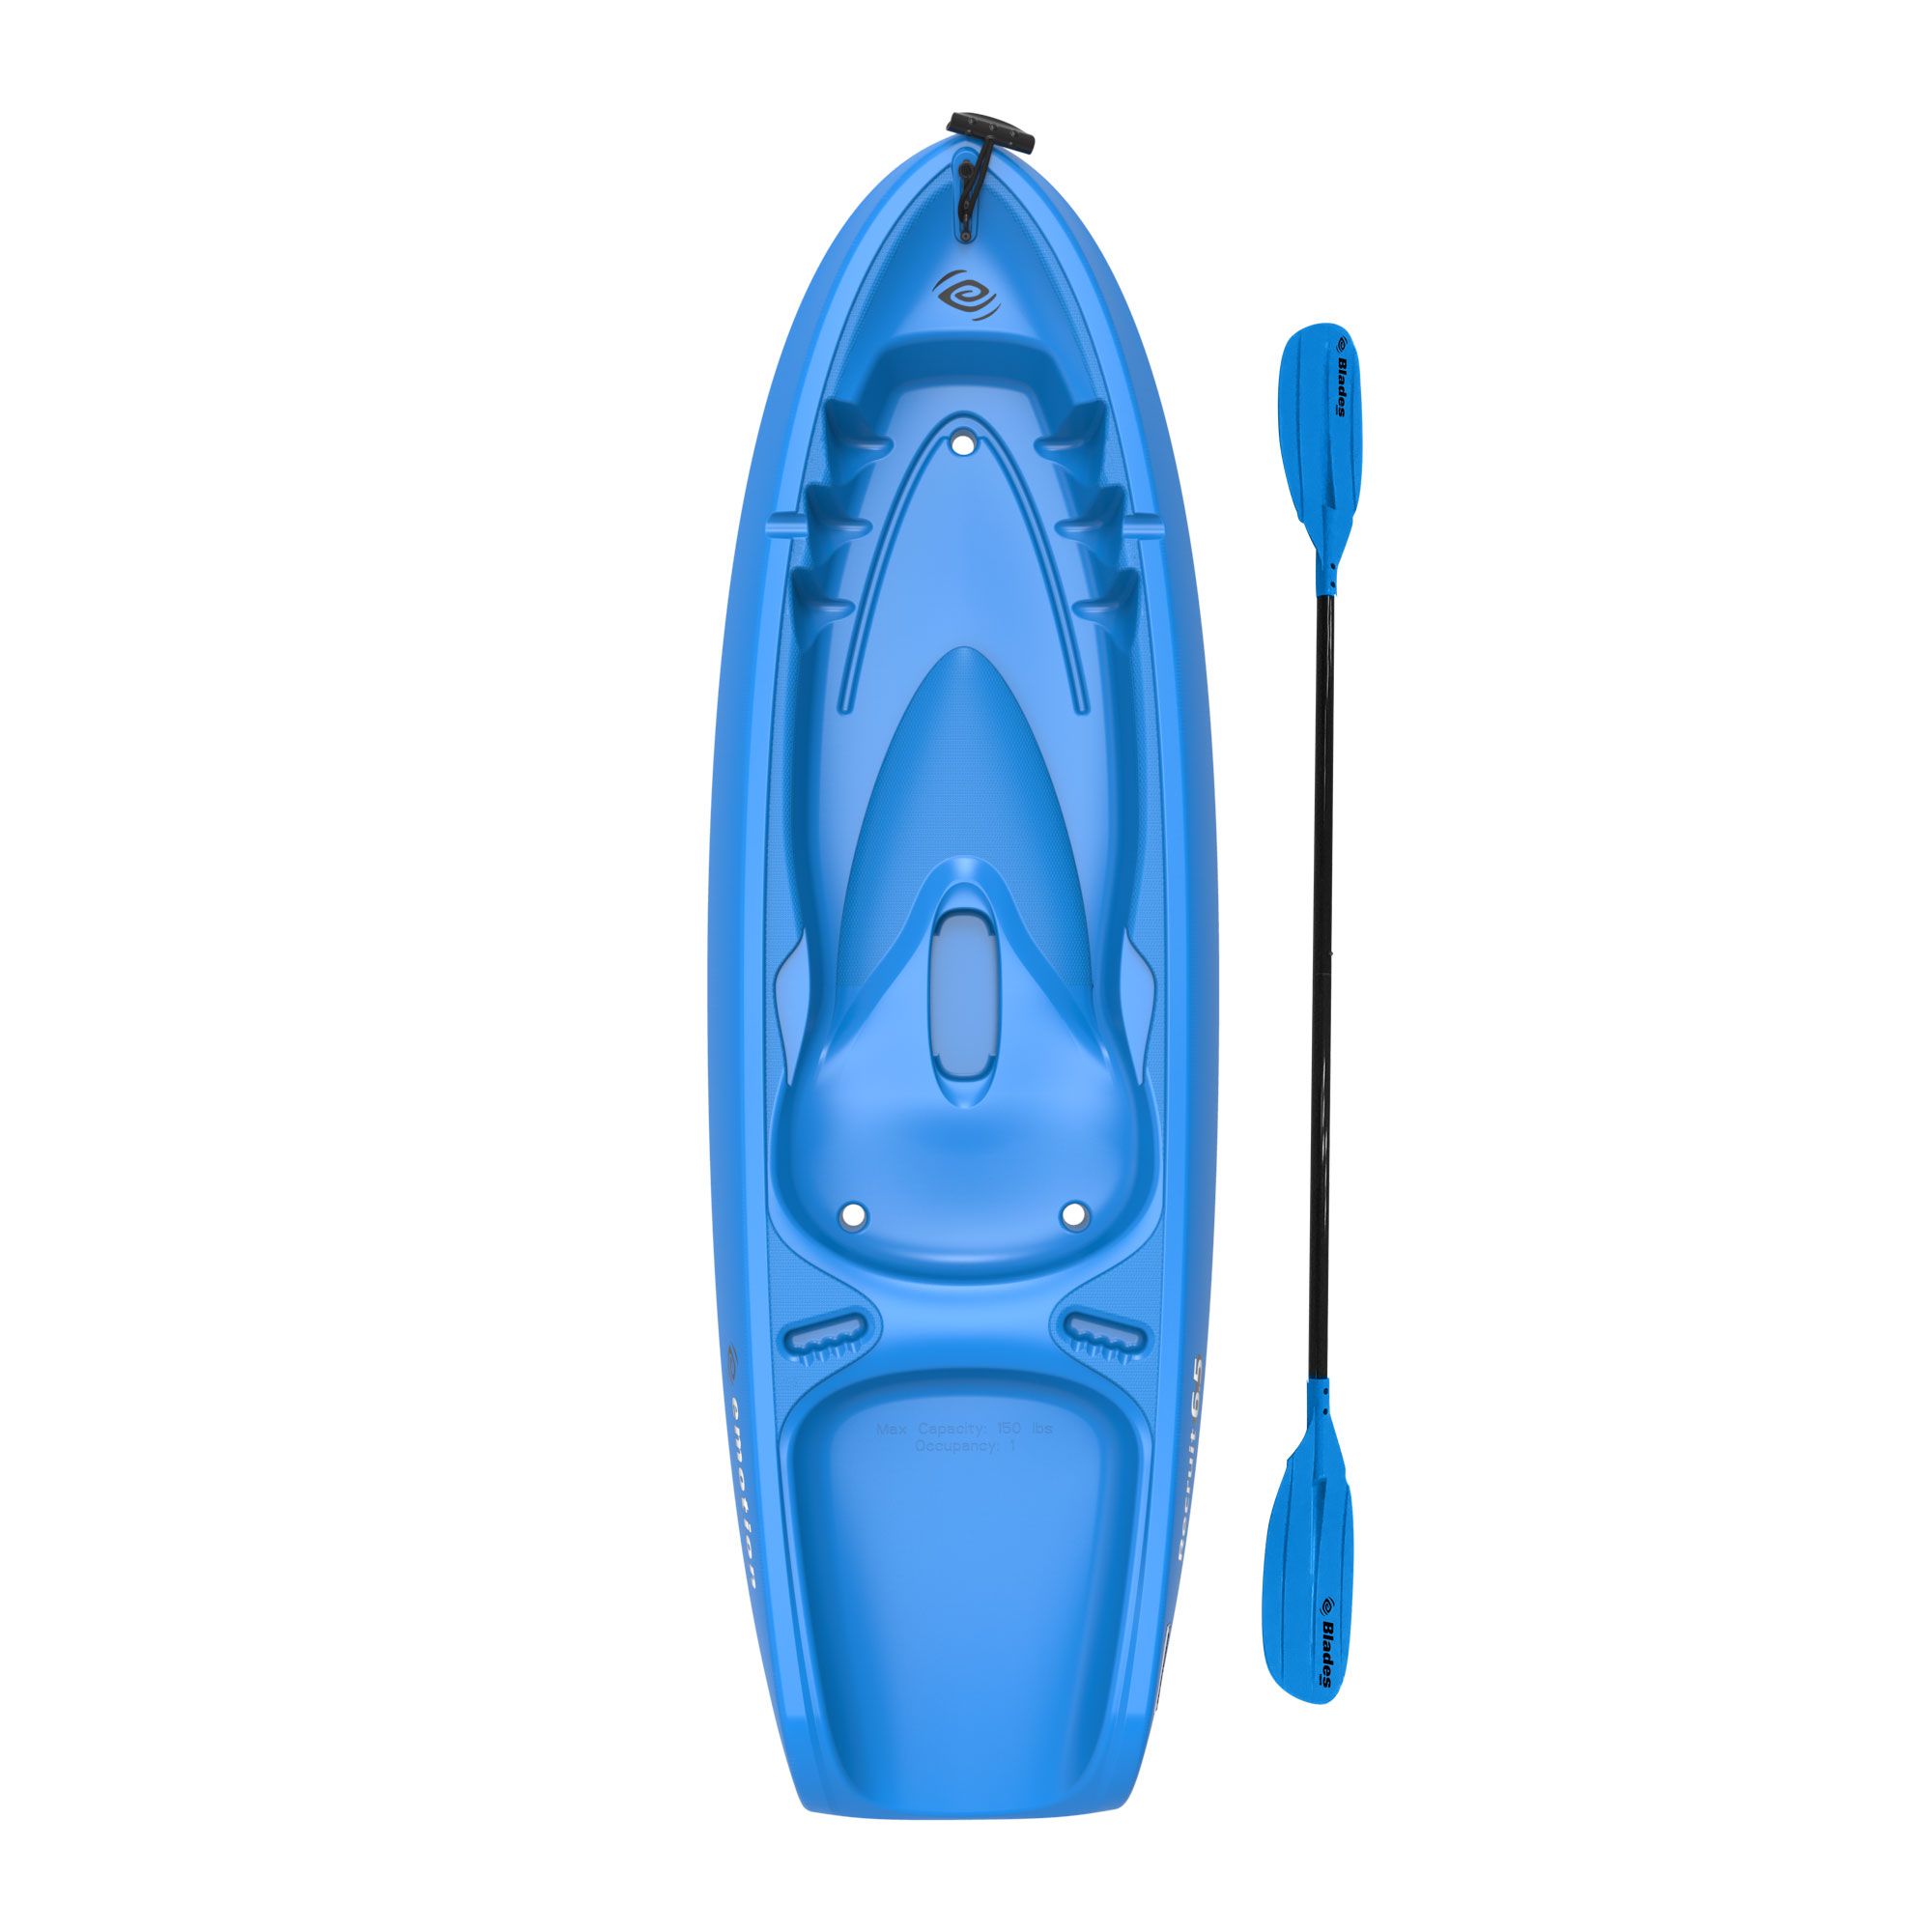 Boats, Boating Supplies & Accessories